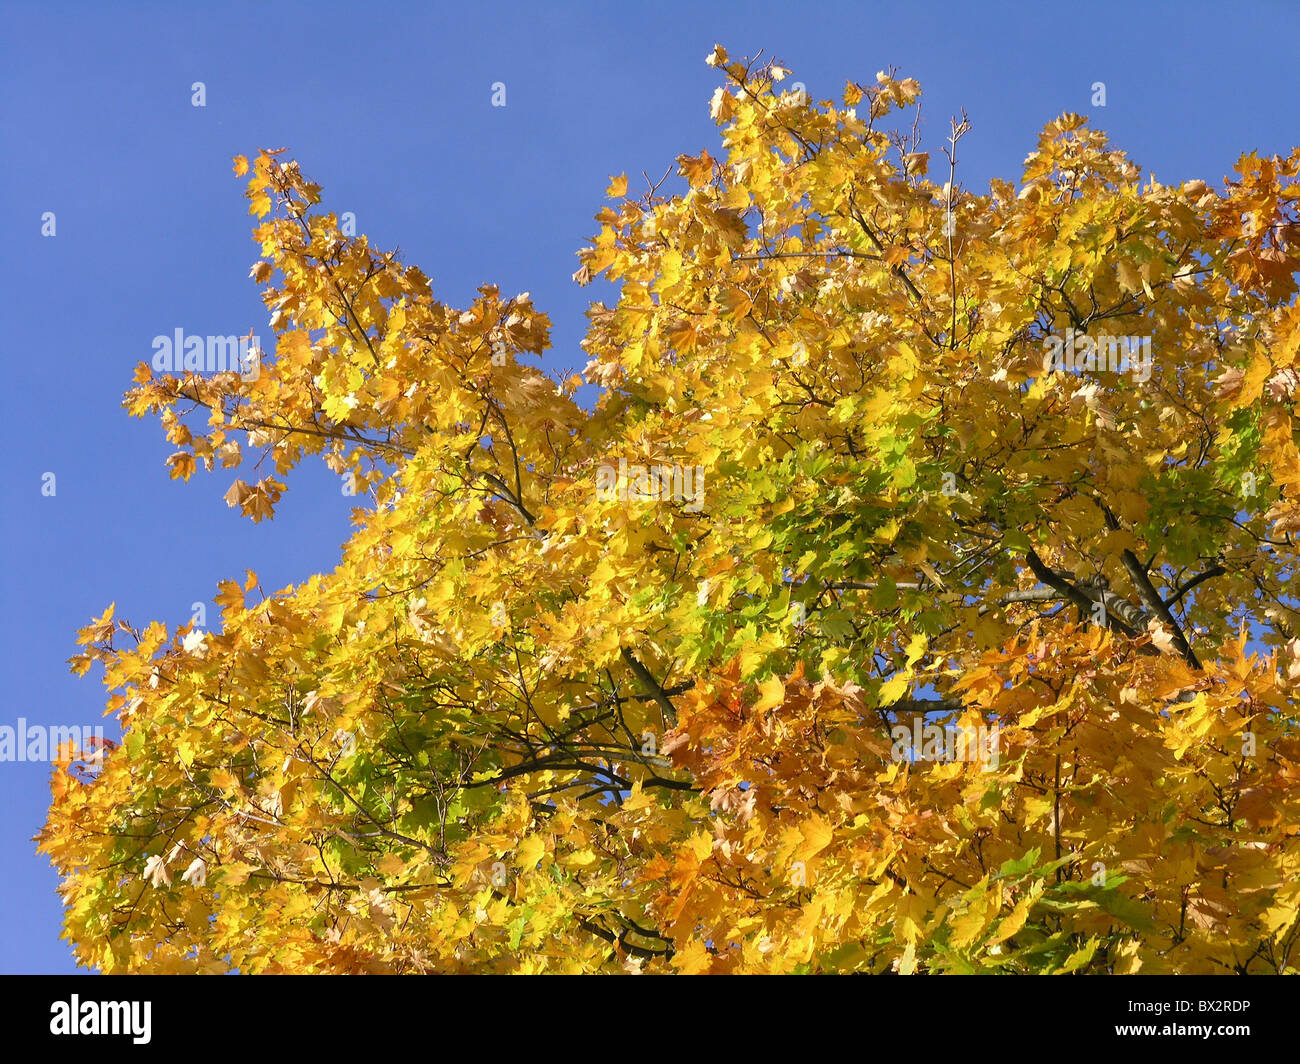 autumn tree leaves yellow branches branches knots sky Stock Photo